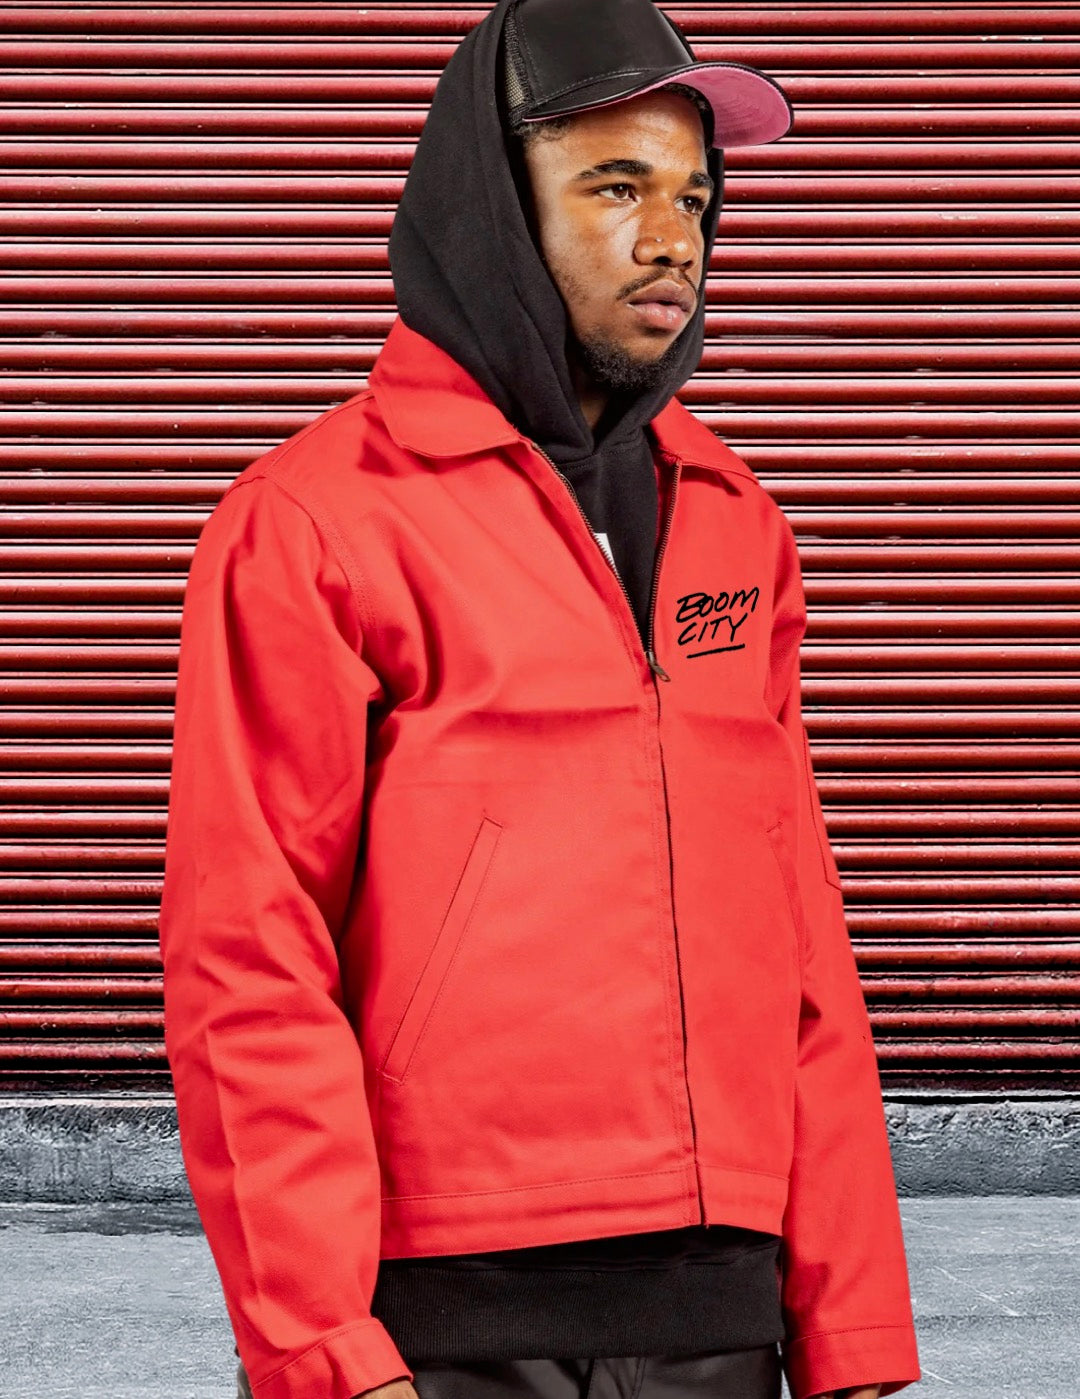 BoomCity Industrial Light weight jackets